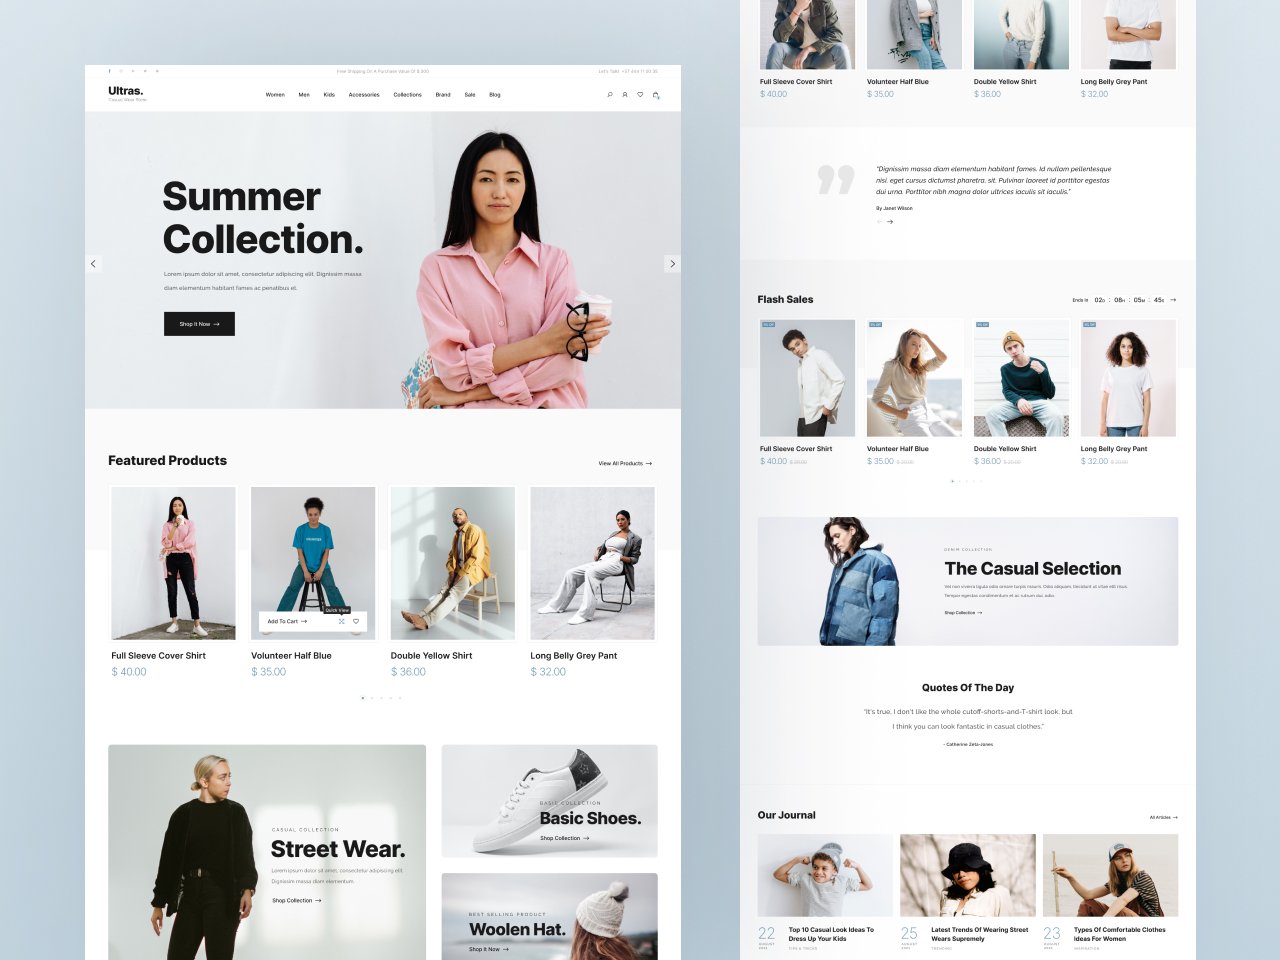 ecommerce website templates cover image